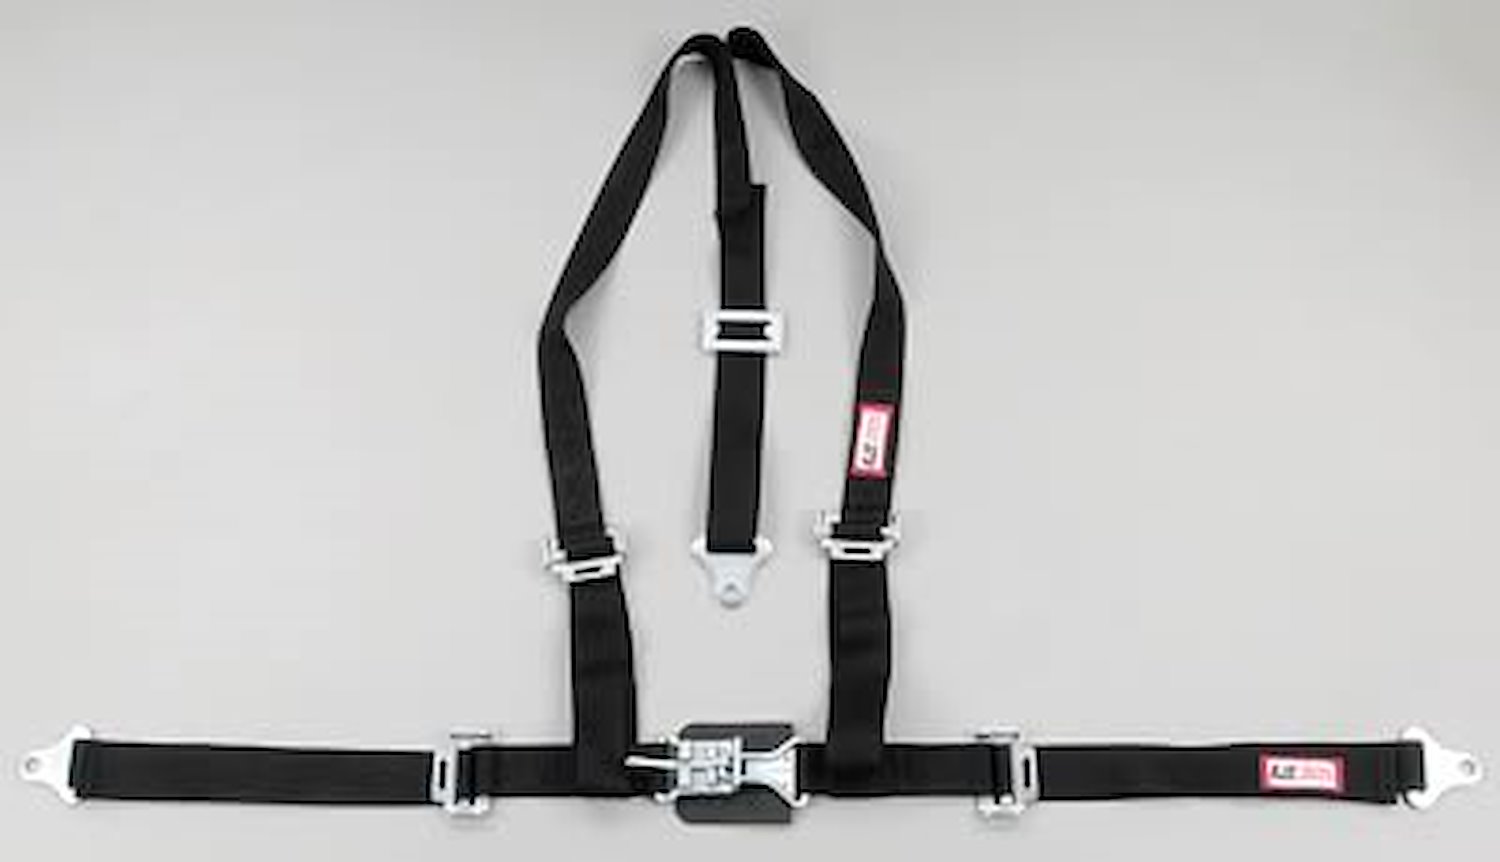 NON-SFI L&L HARNESS 2 PULL UP Lap Belt w/Adjuster SNAP 2 S.H. Individual FLOOR MOUNT w/STERNUM STRAP WRAP/BOLT HOT PINK